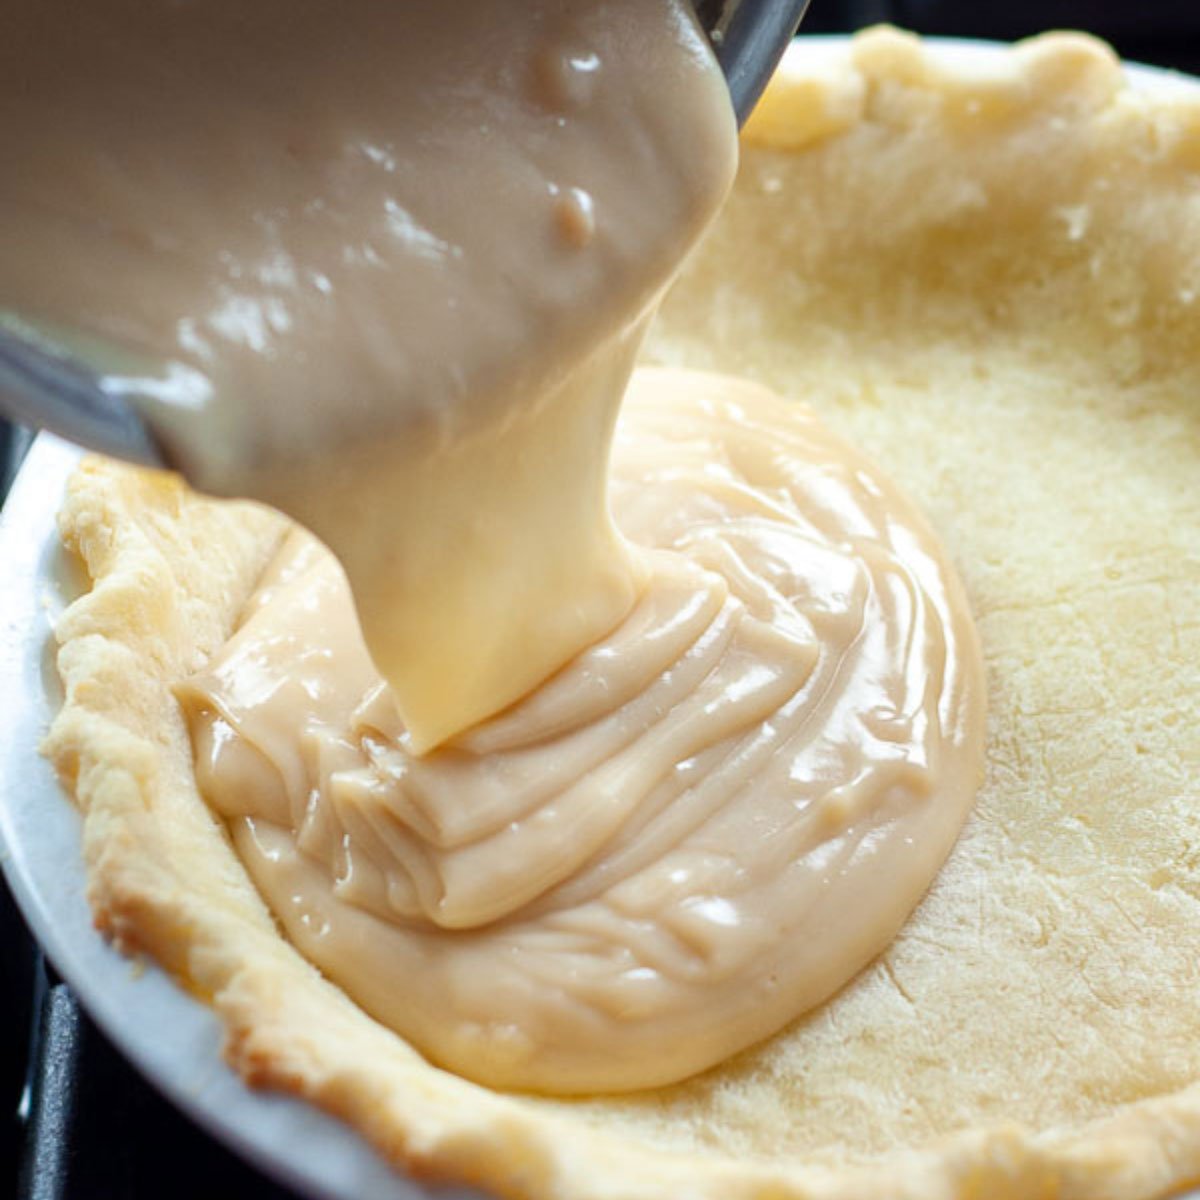 the custard being poured into the partially baked crust.